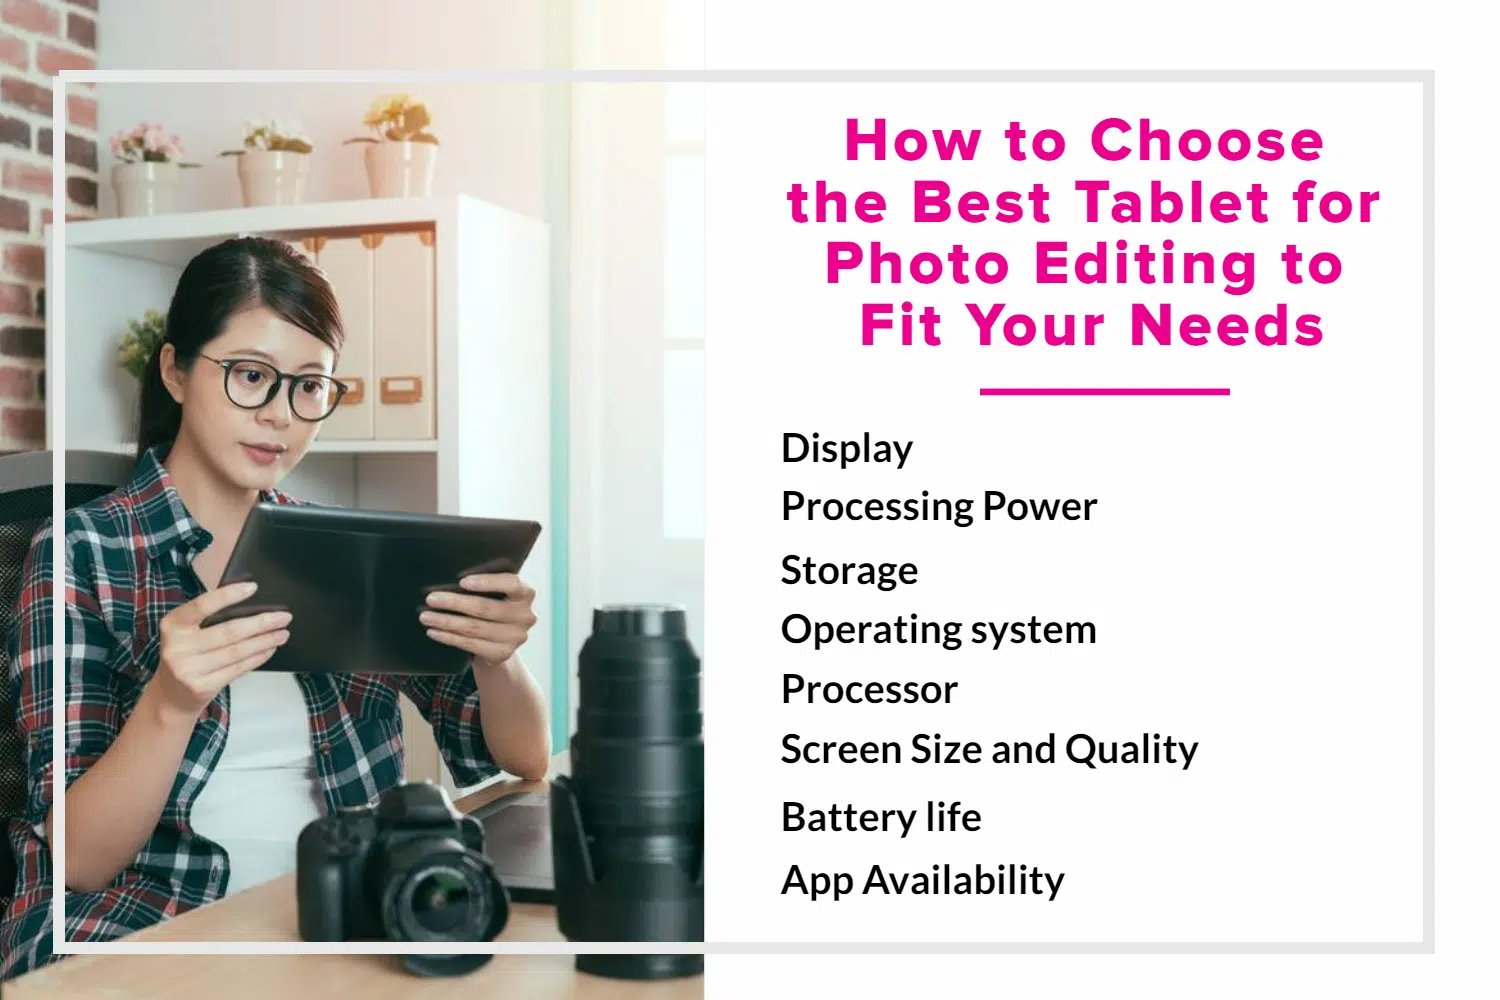 How to Choose the Best Tablet for Photo Editing to Fit Your Needs